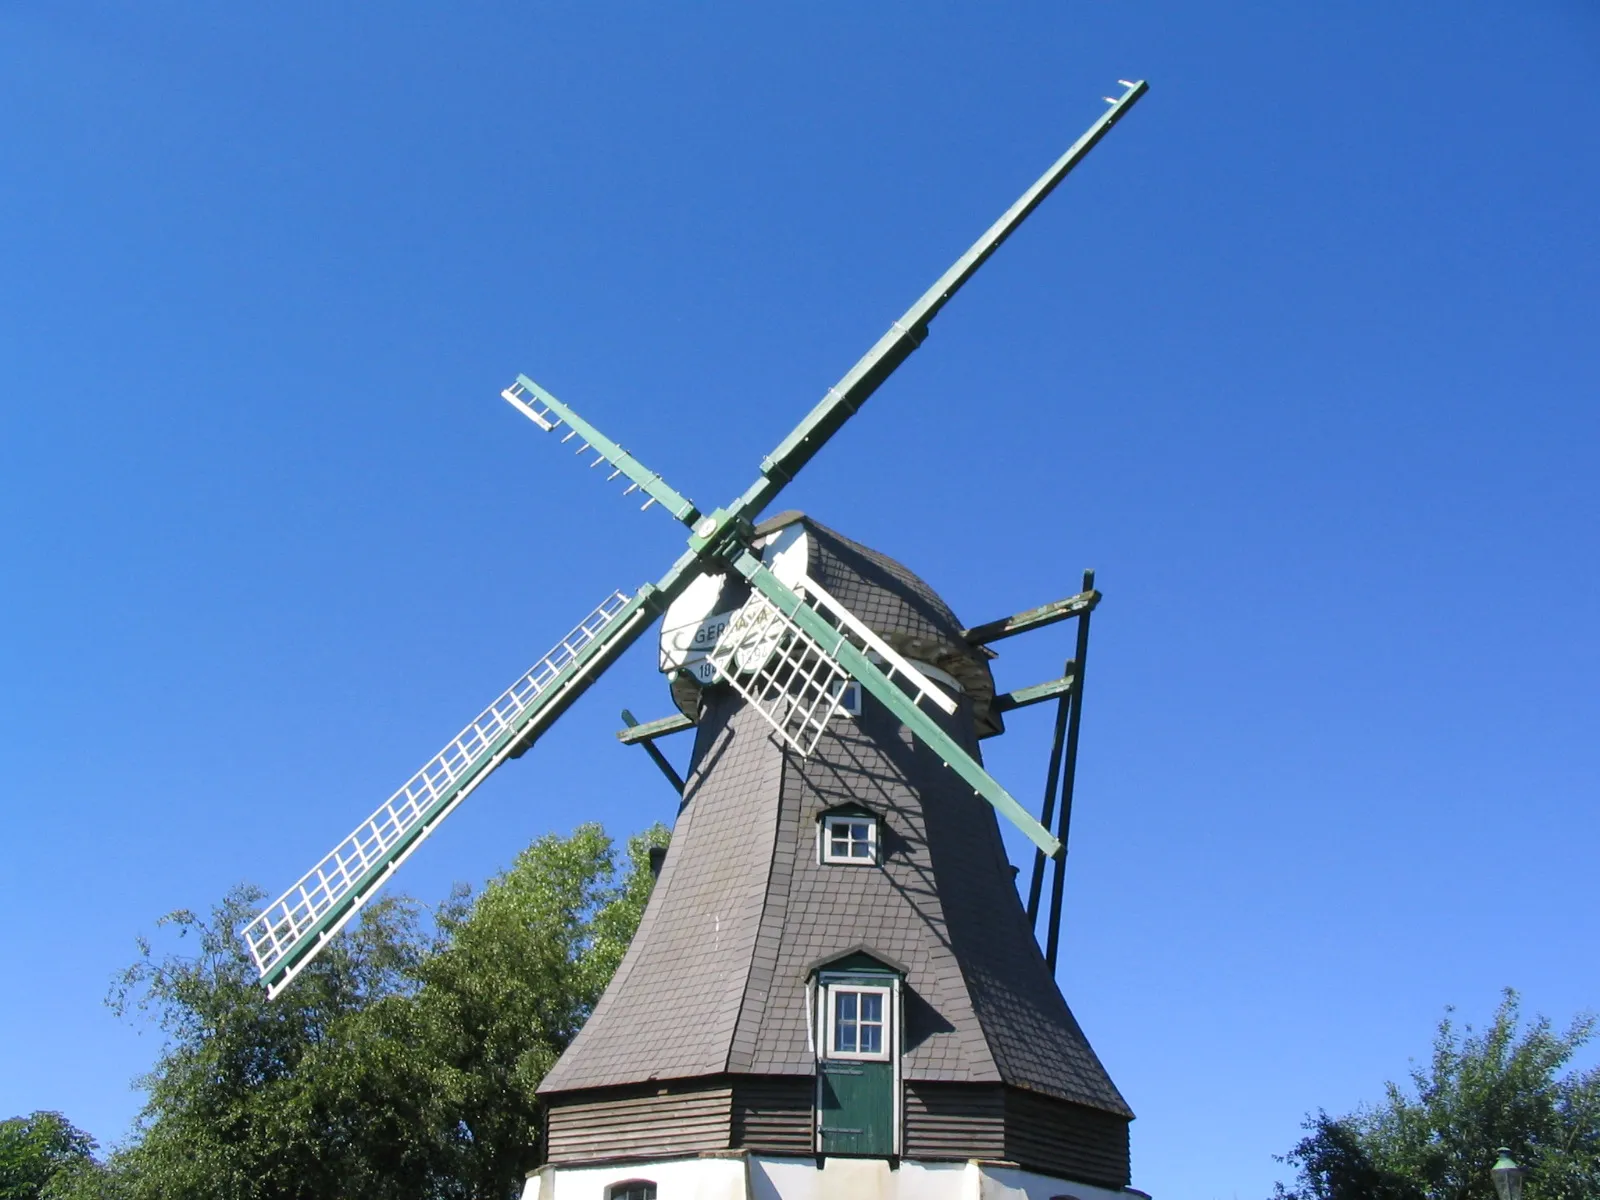 Photo showing: Windmill "Germania" in Wöhrden, Dithmarschen. Build in 1847, working until 1955 by now a private house.